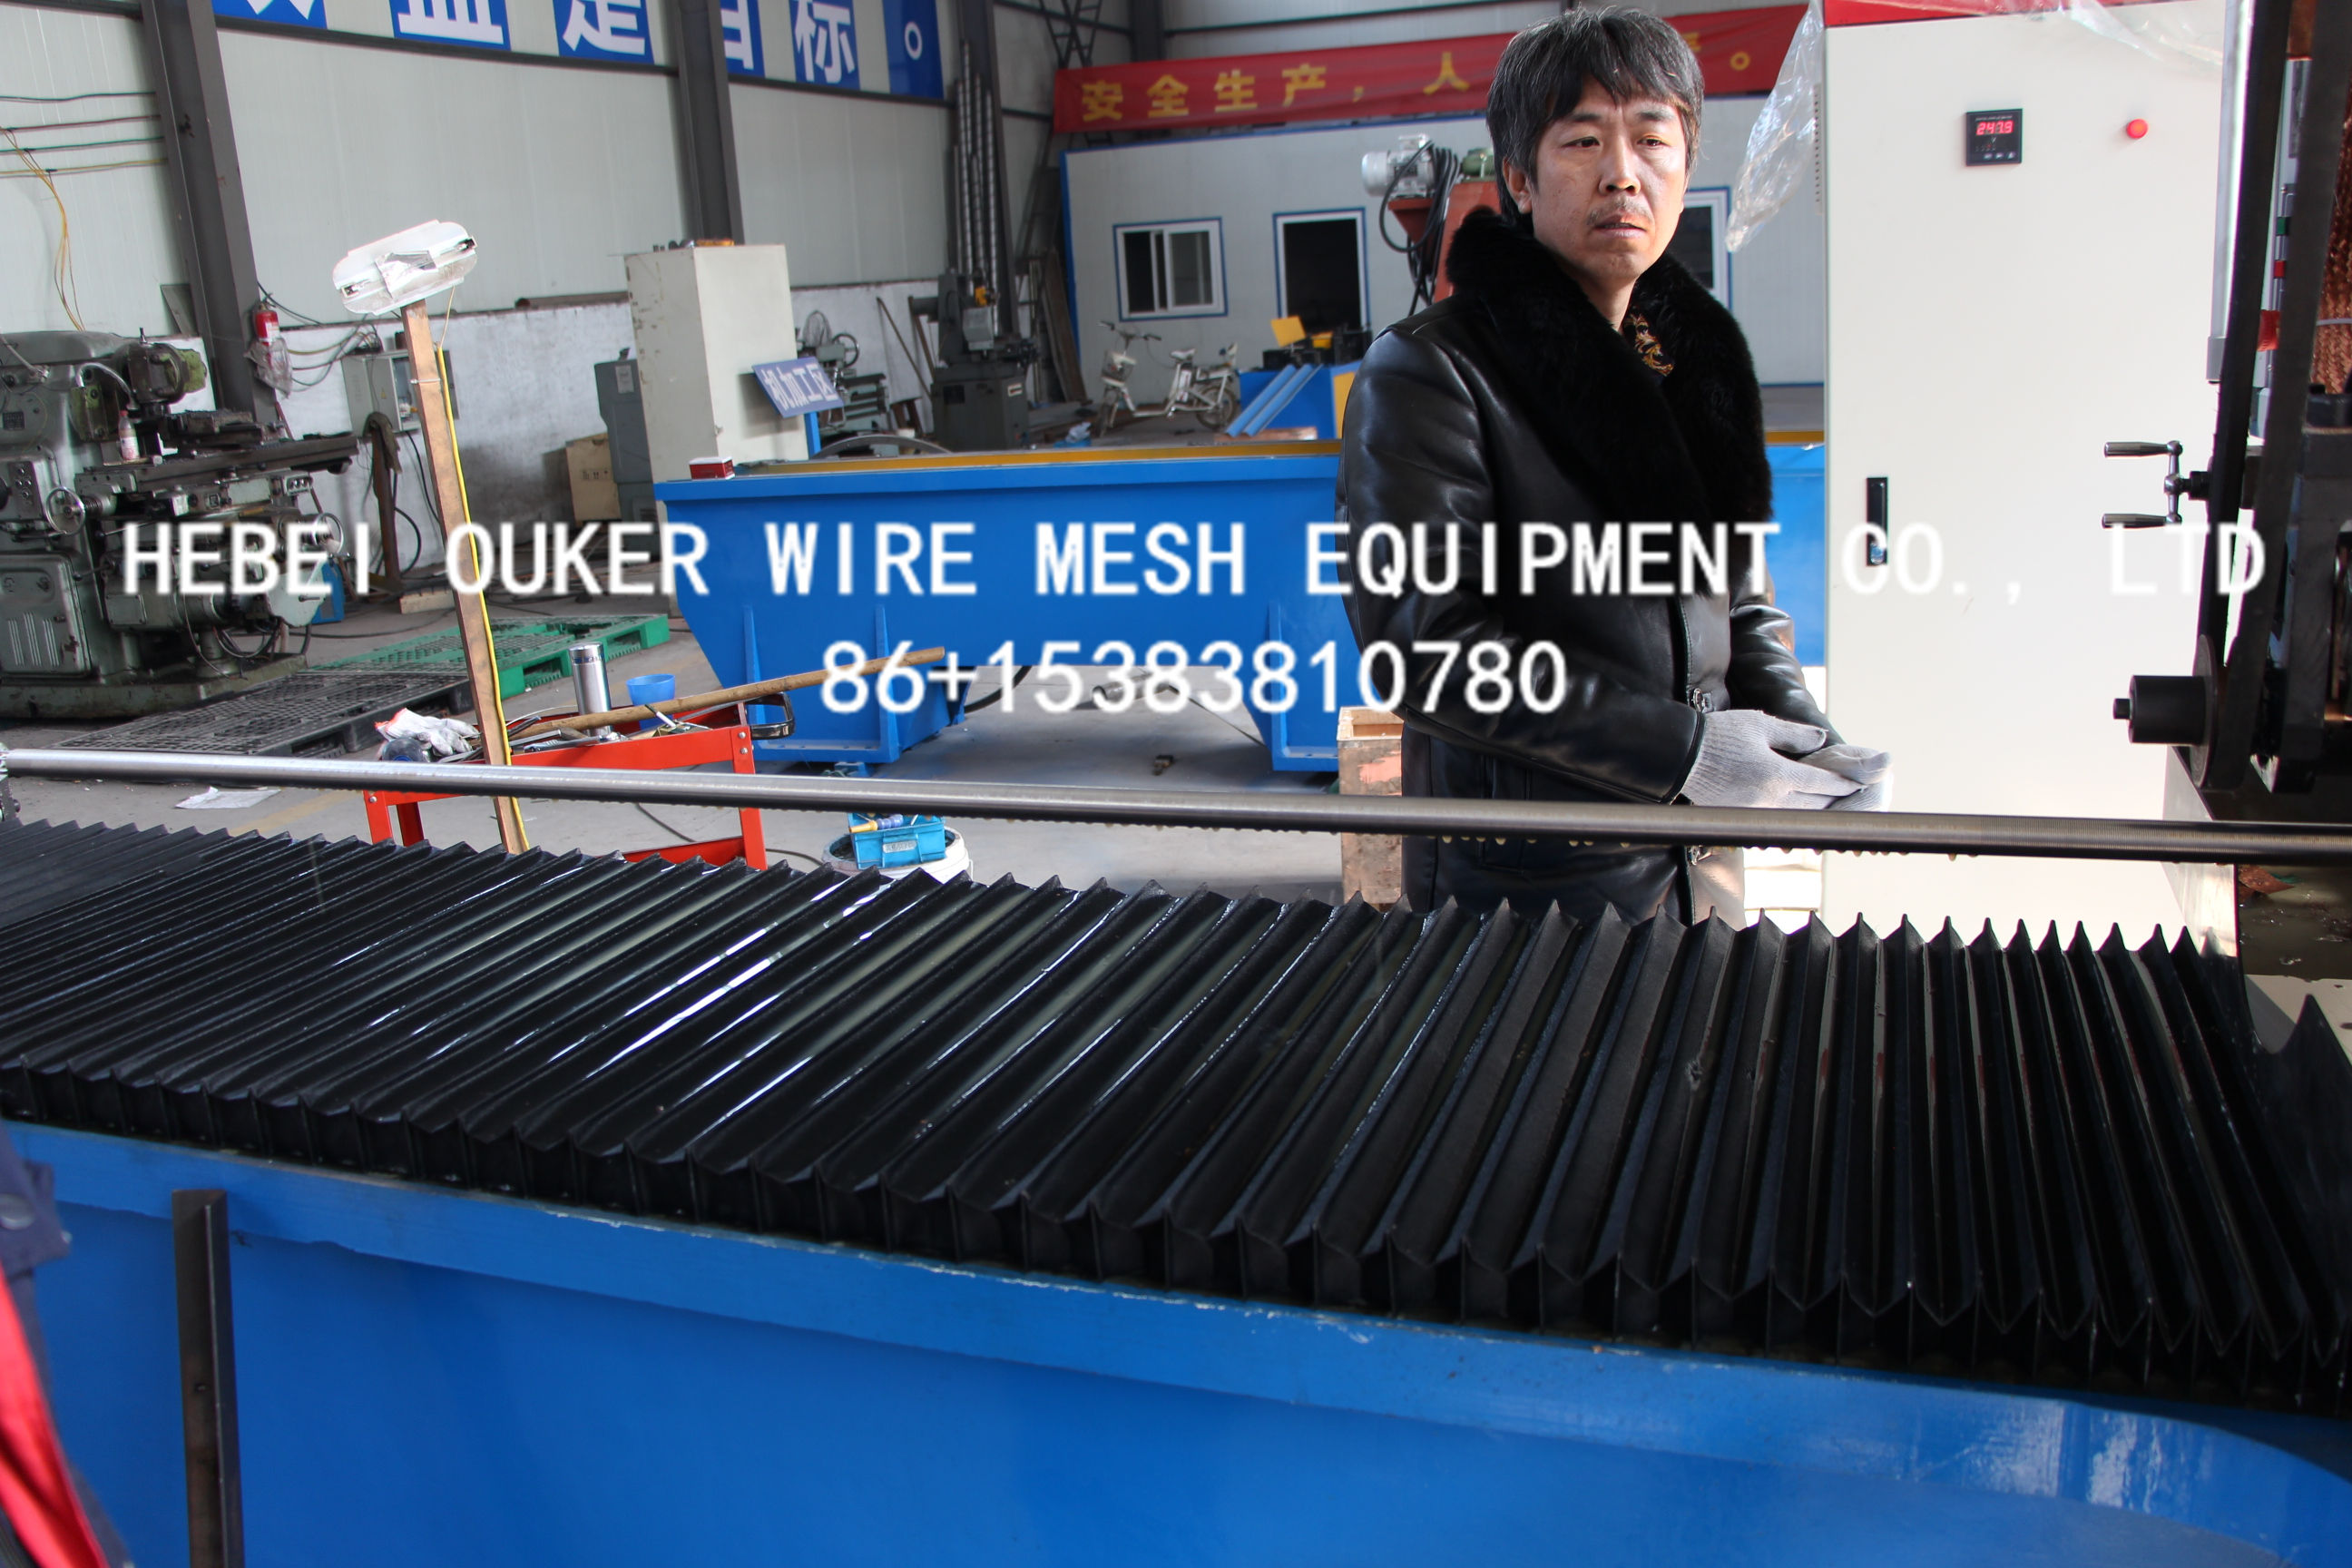 Direct wire wrap on pipe screen welding machine